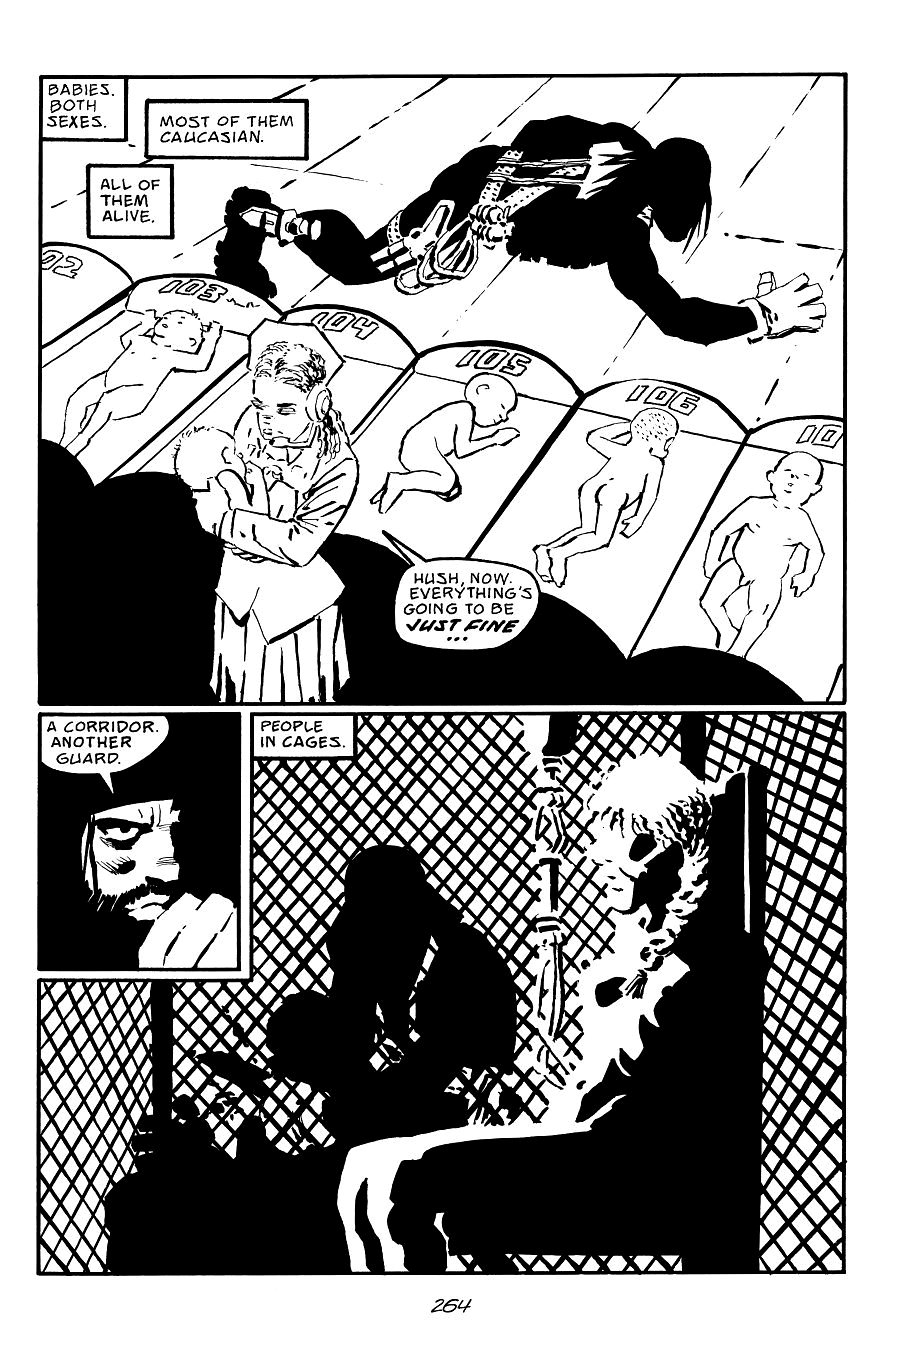 page 264 of sin city 7 hell and back